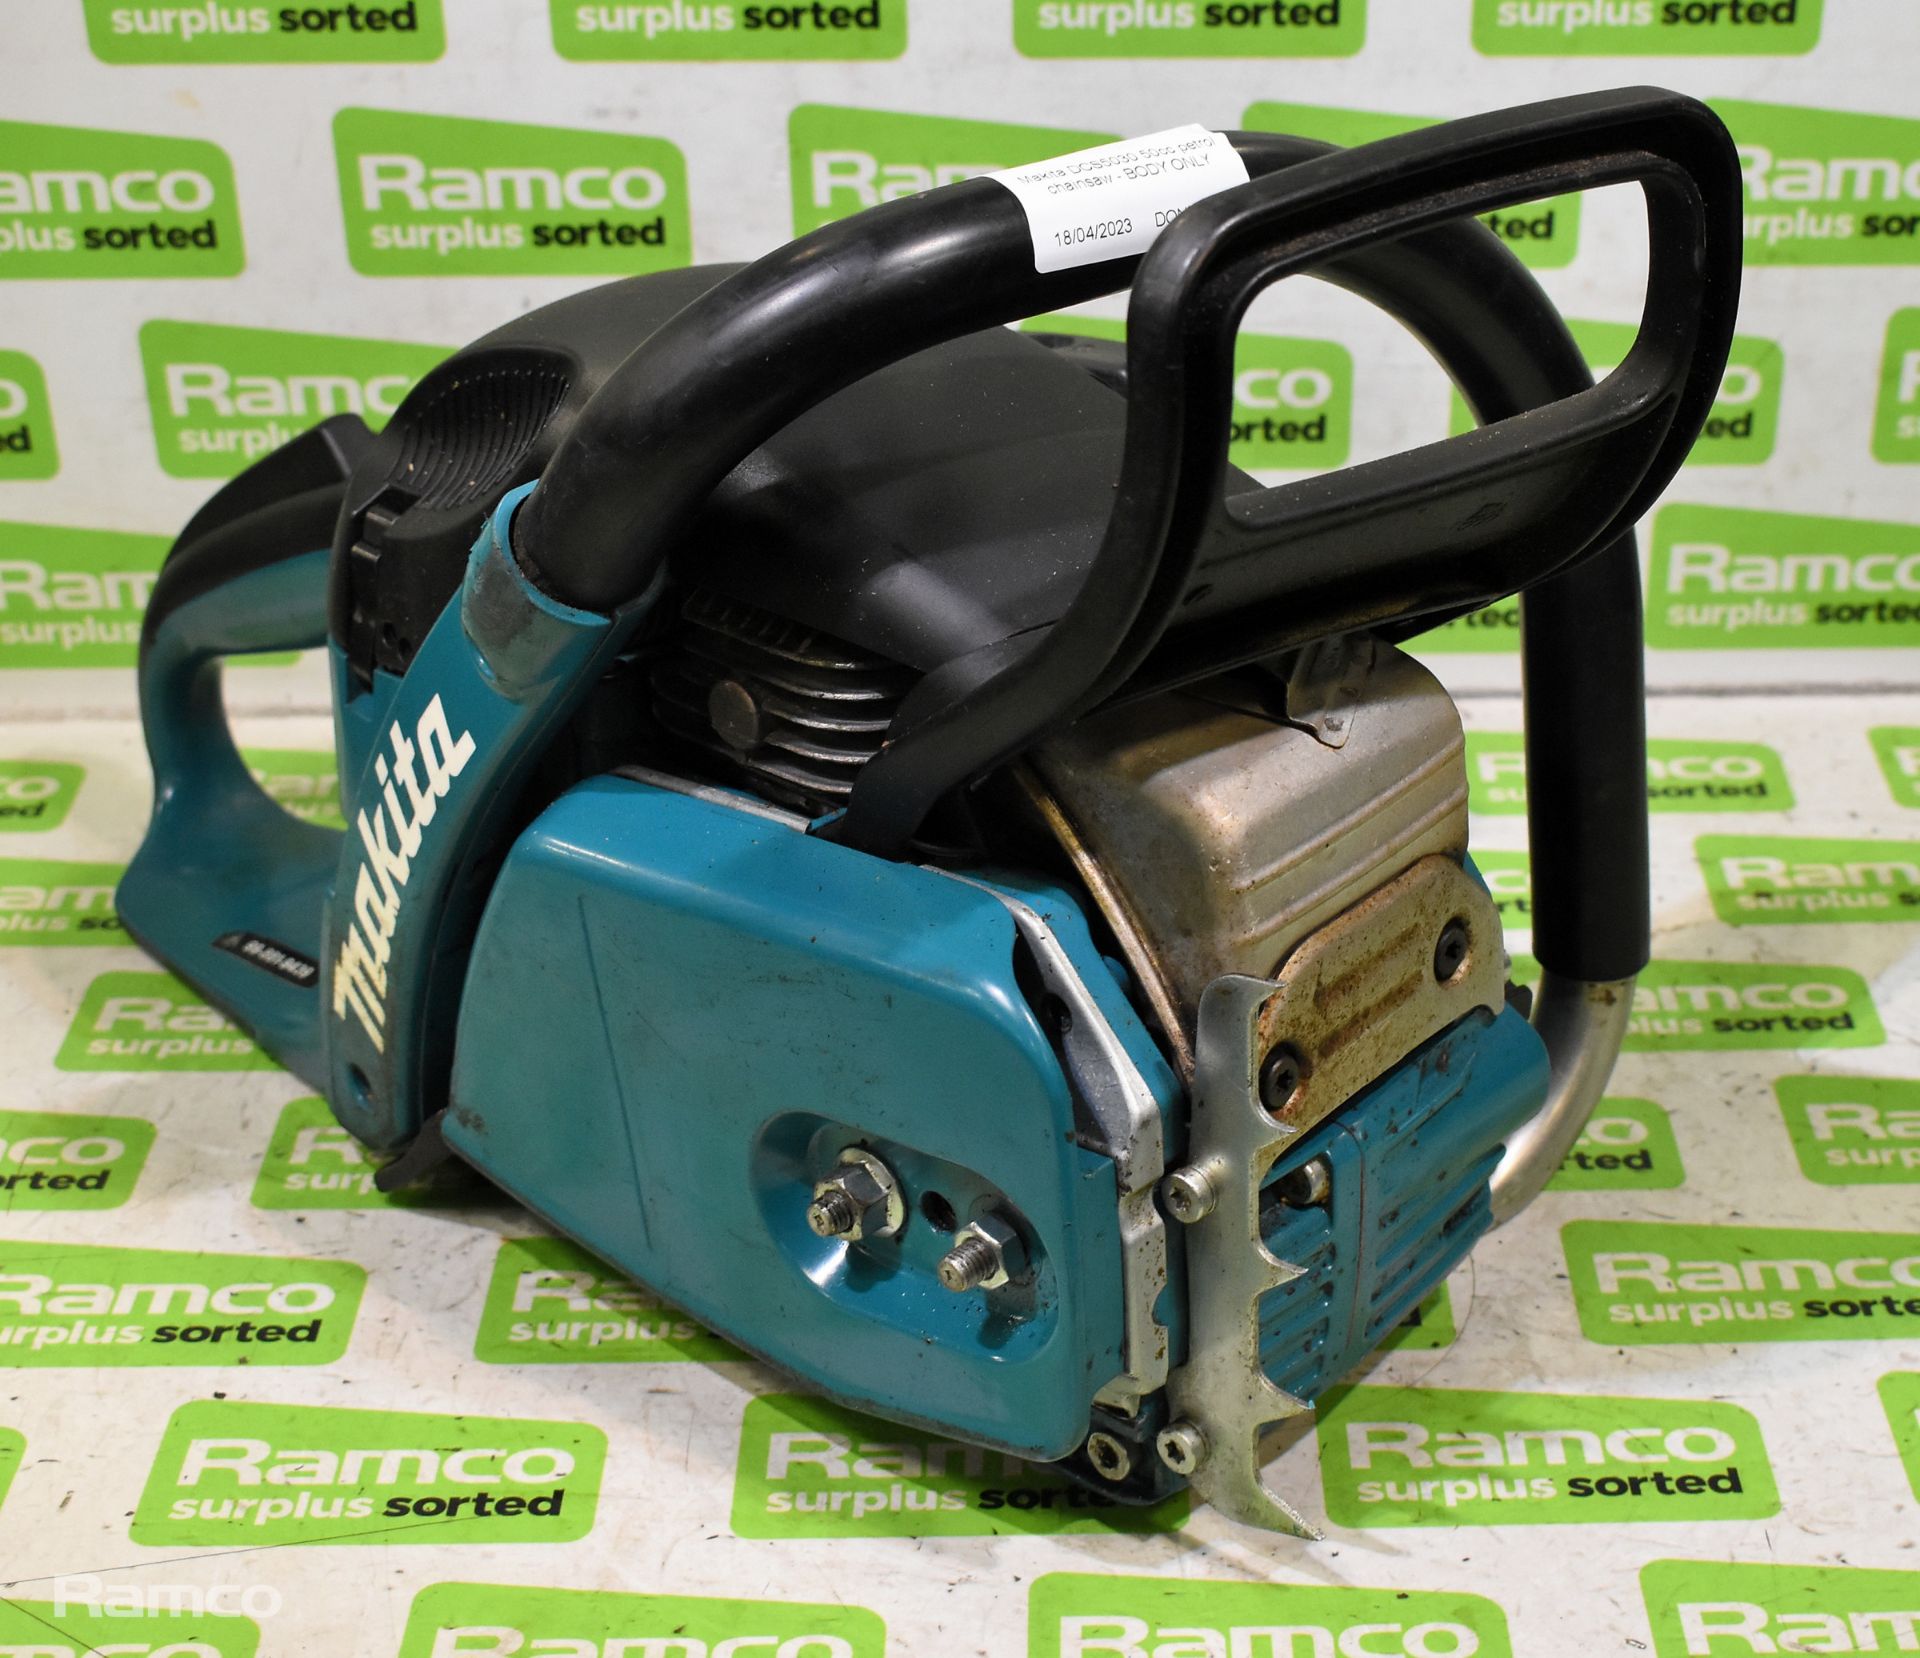 4x Makita DCS5030 50cc petrol chainsaw - BODIES ONLY - AS SPARES AND REPAIRS - Image 9 of 21